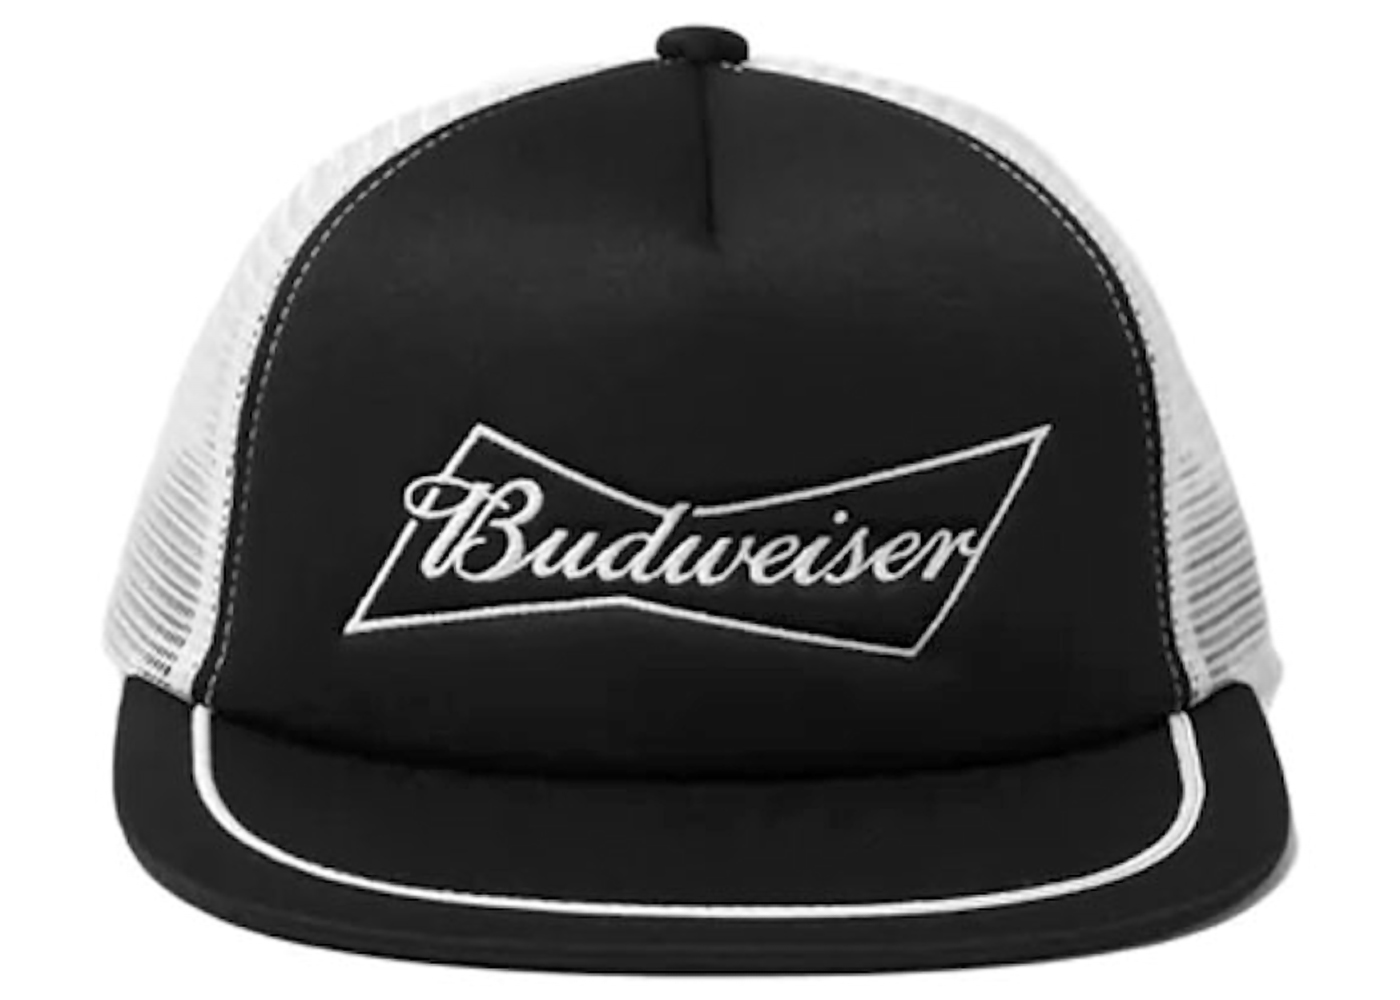 Wasted Youth x Budweiser Mesh Cap Black - SS22 - JP